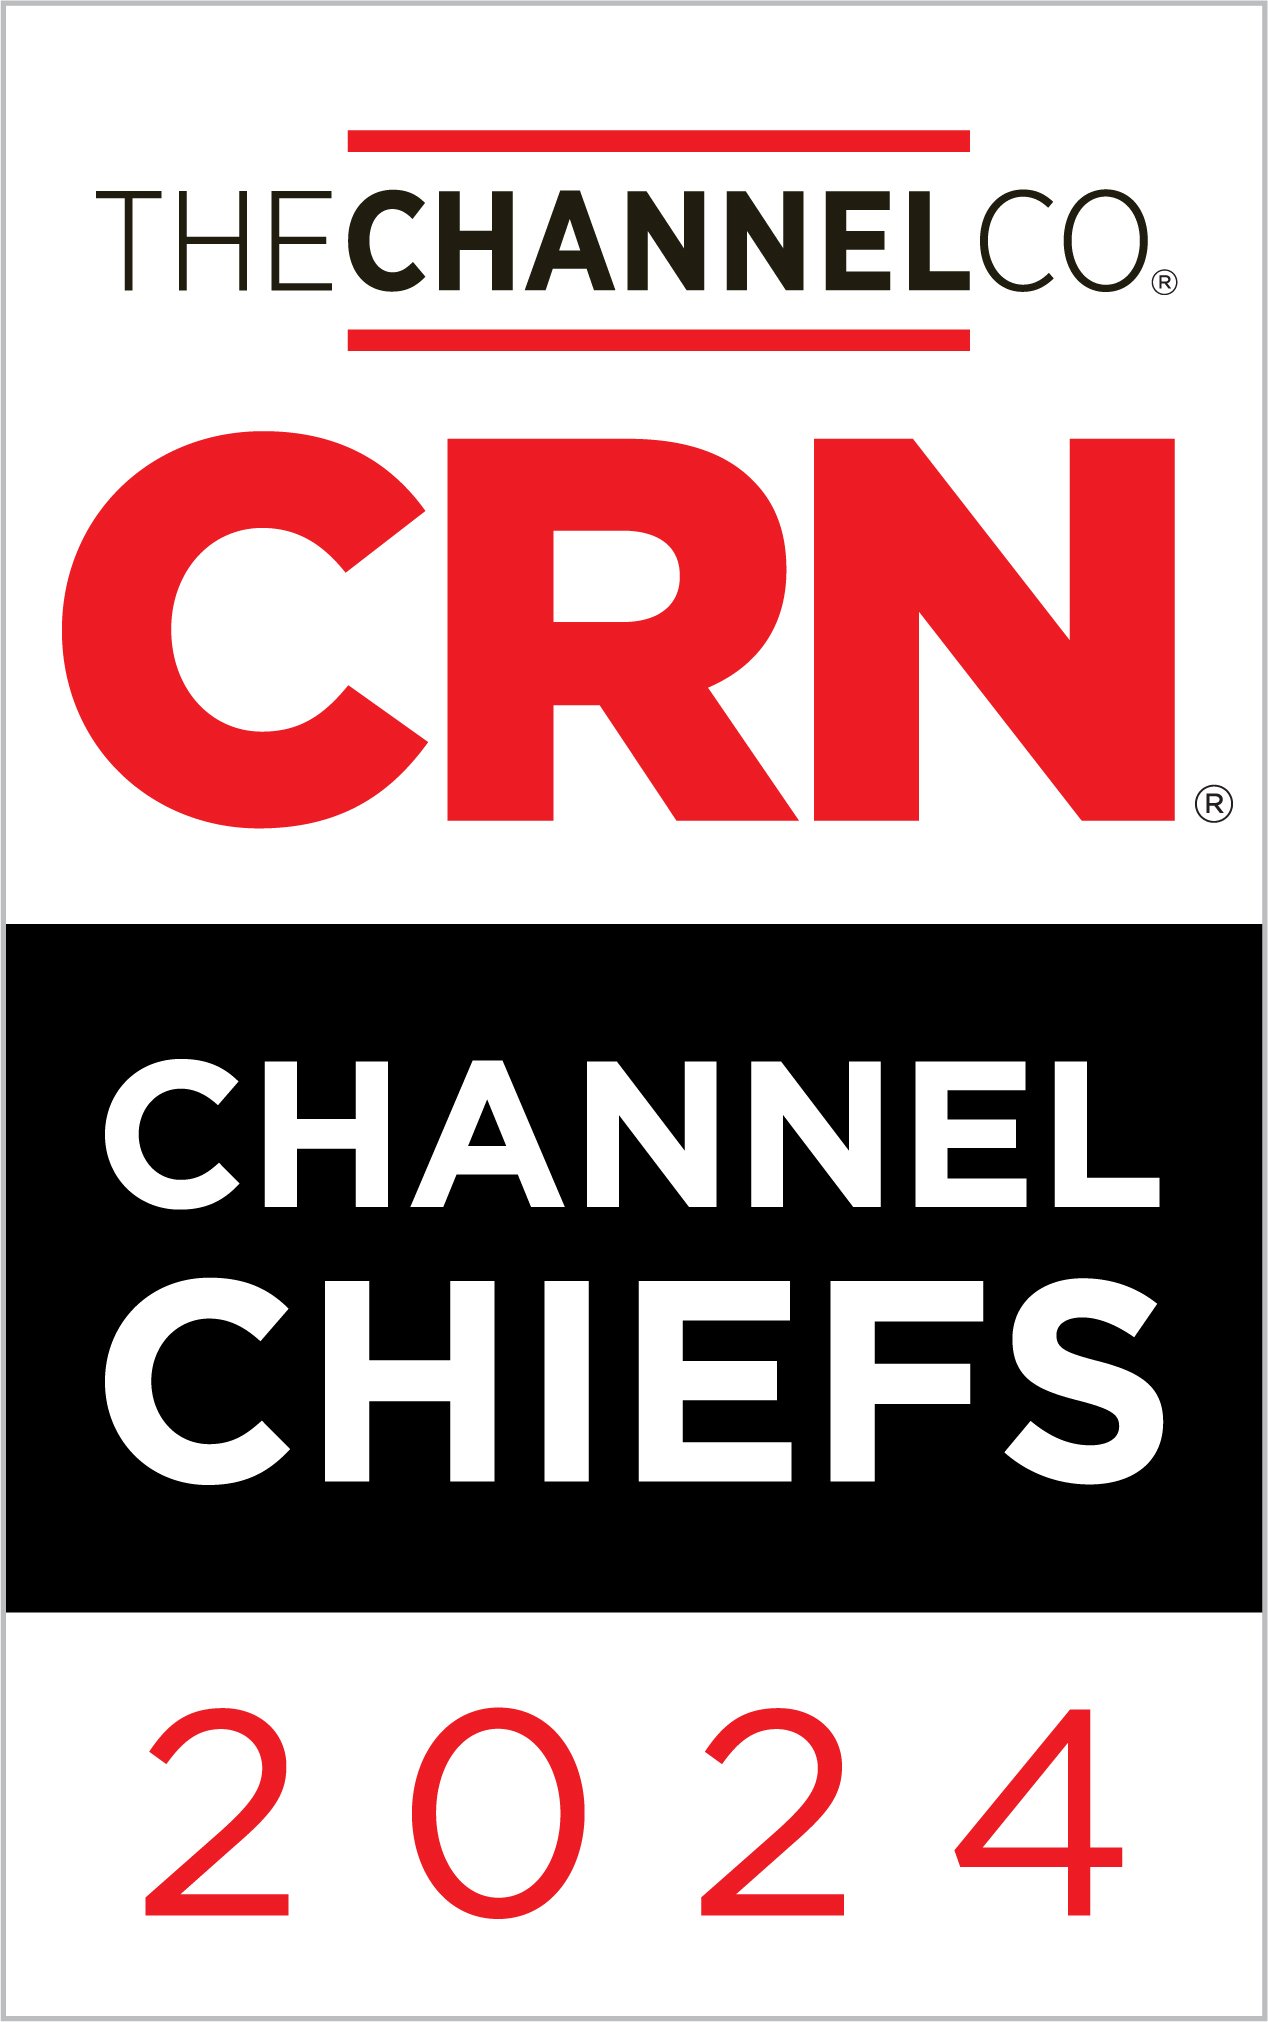 Steve Chappell Recognized as 2024 CRN® Channel Chief